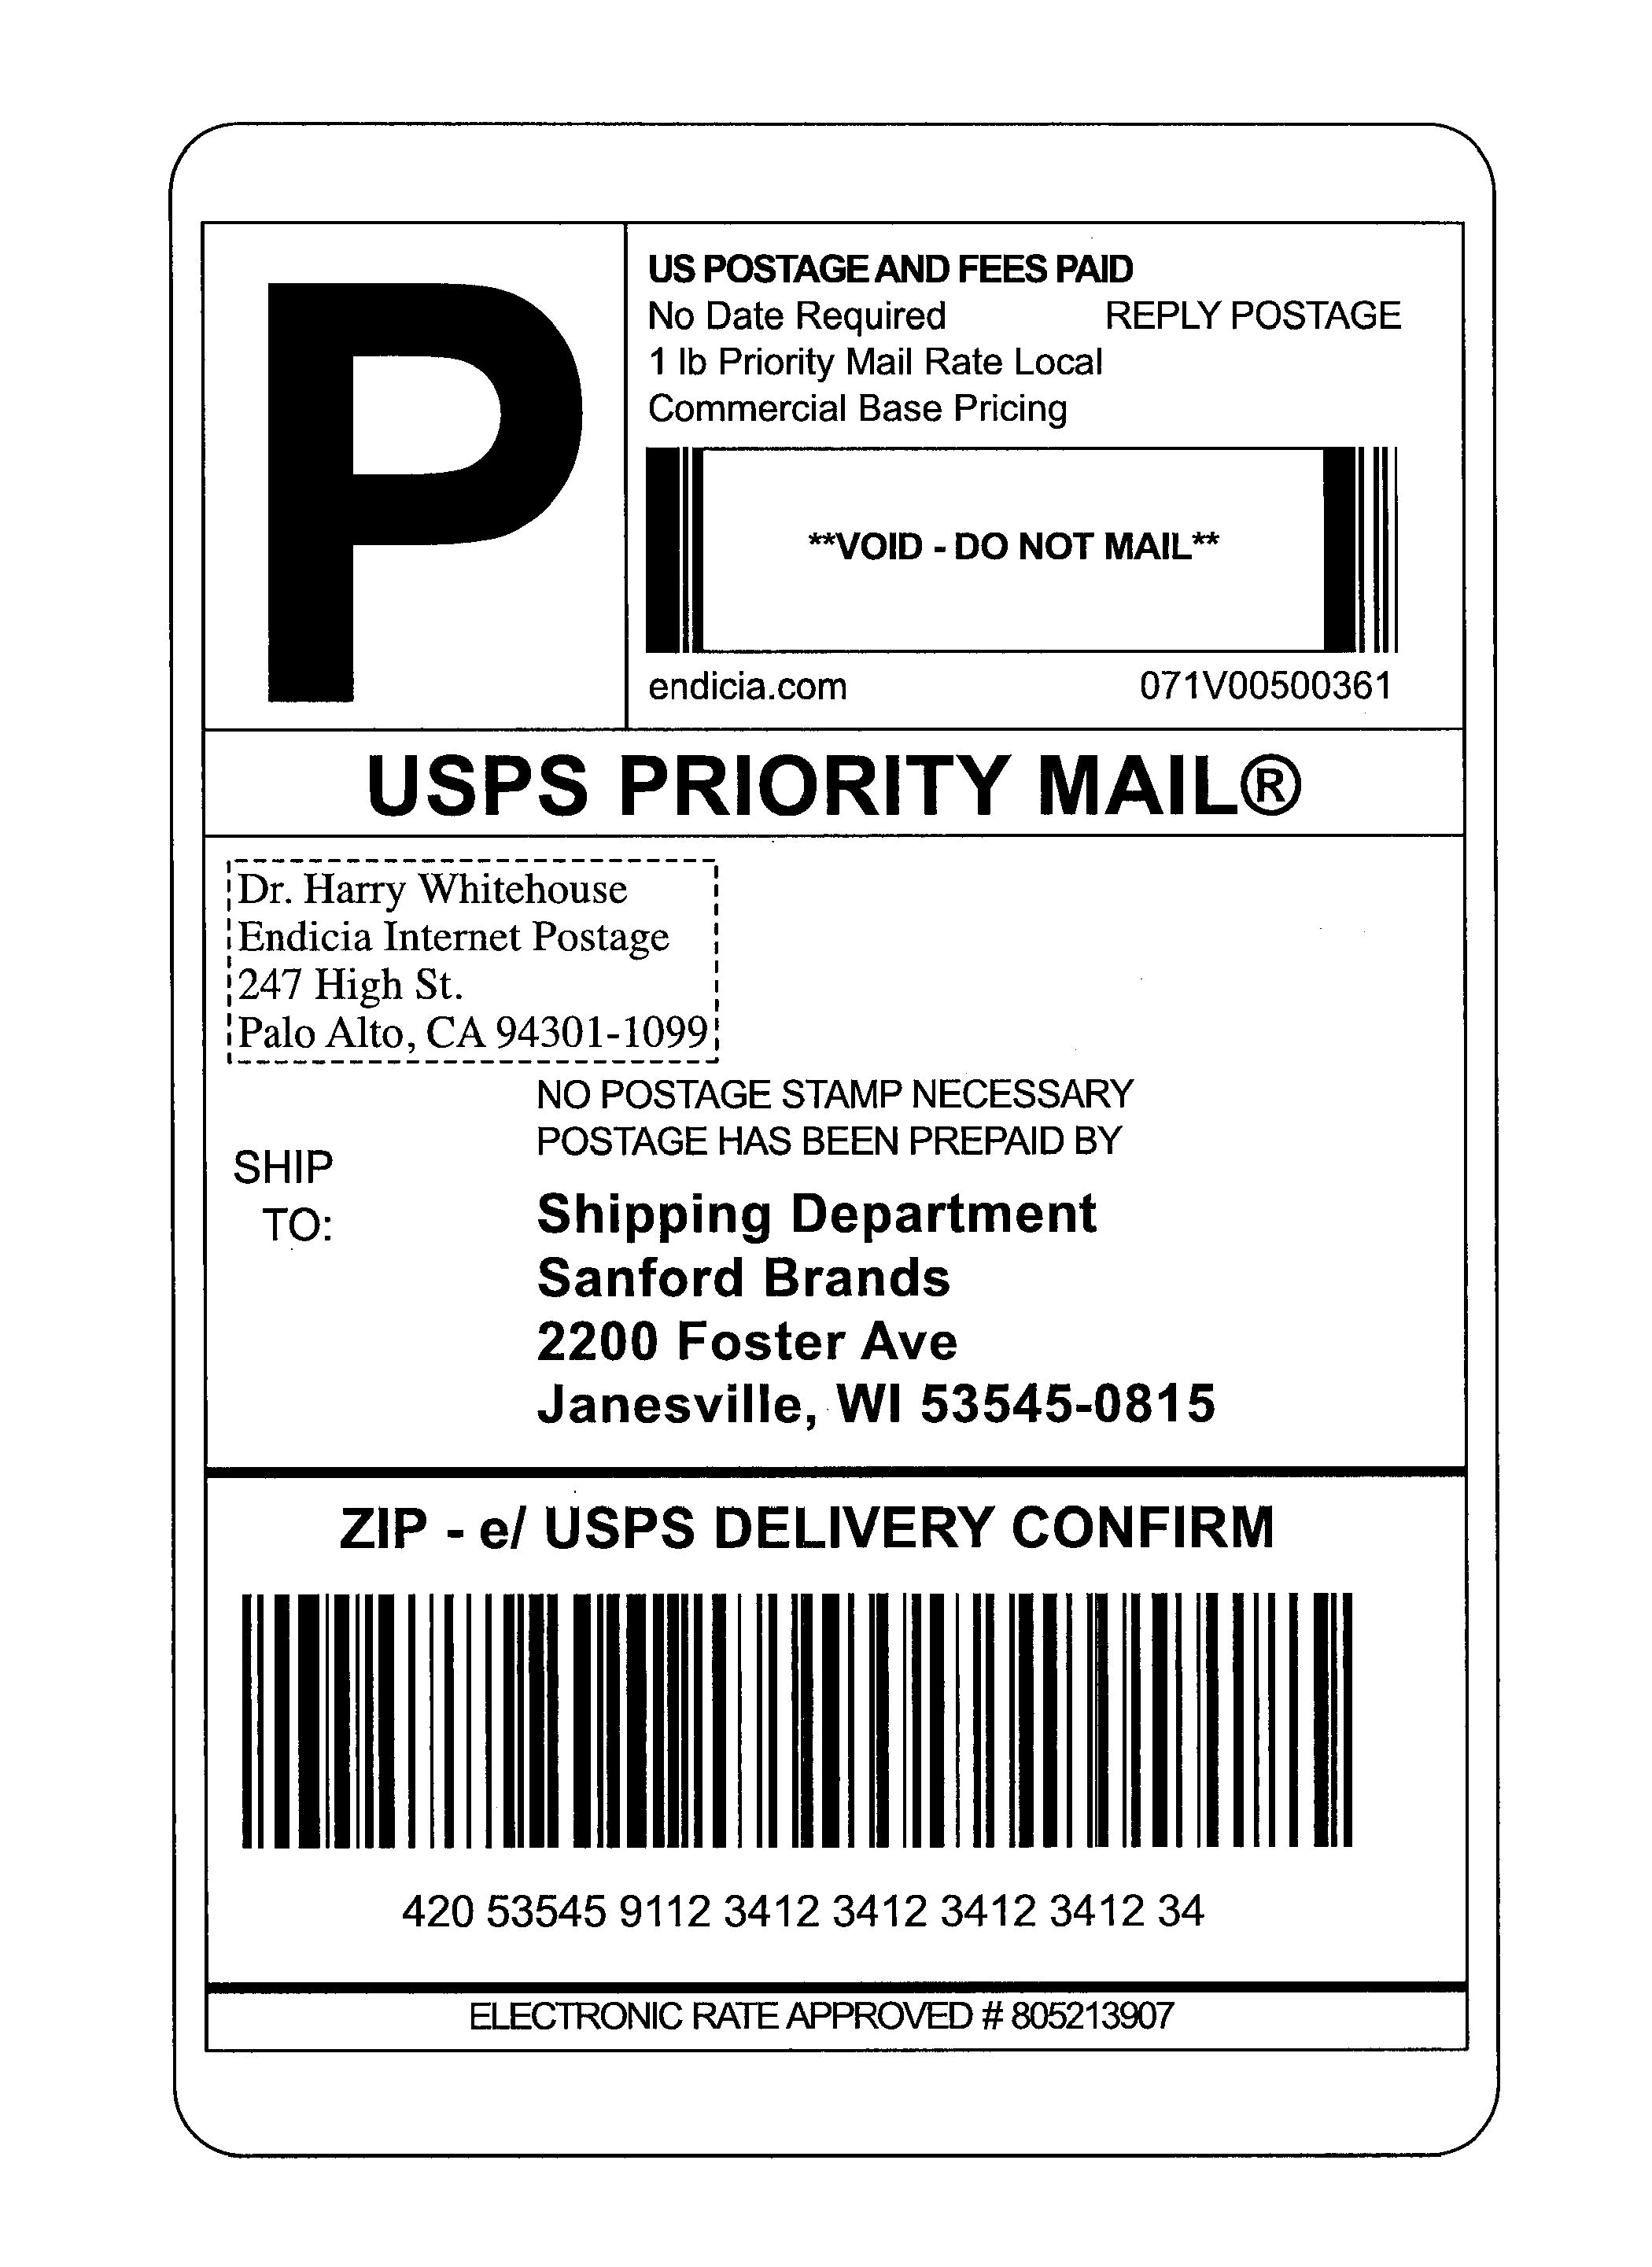 usps-shipping-label-template-printable